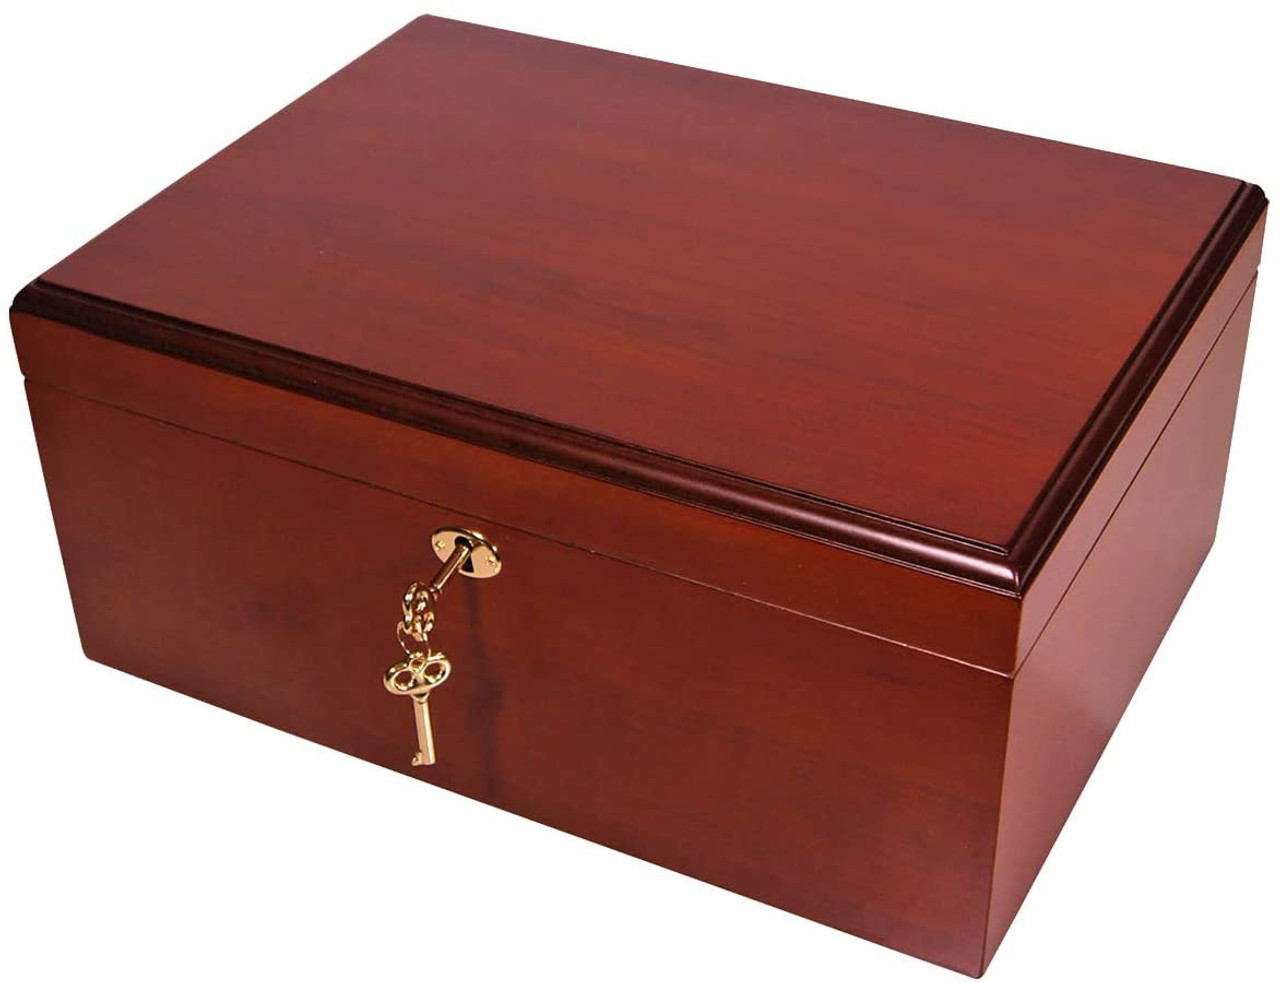 Best Cuban Crafters Clasico Rojo Cherrywood Cigar Humidor for 100